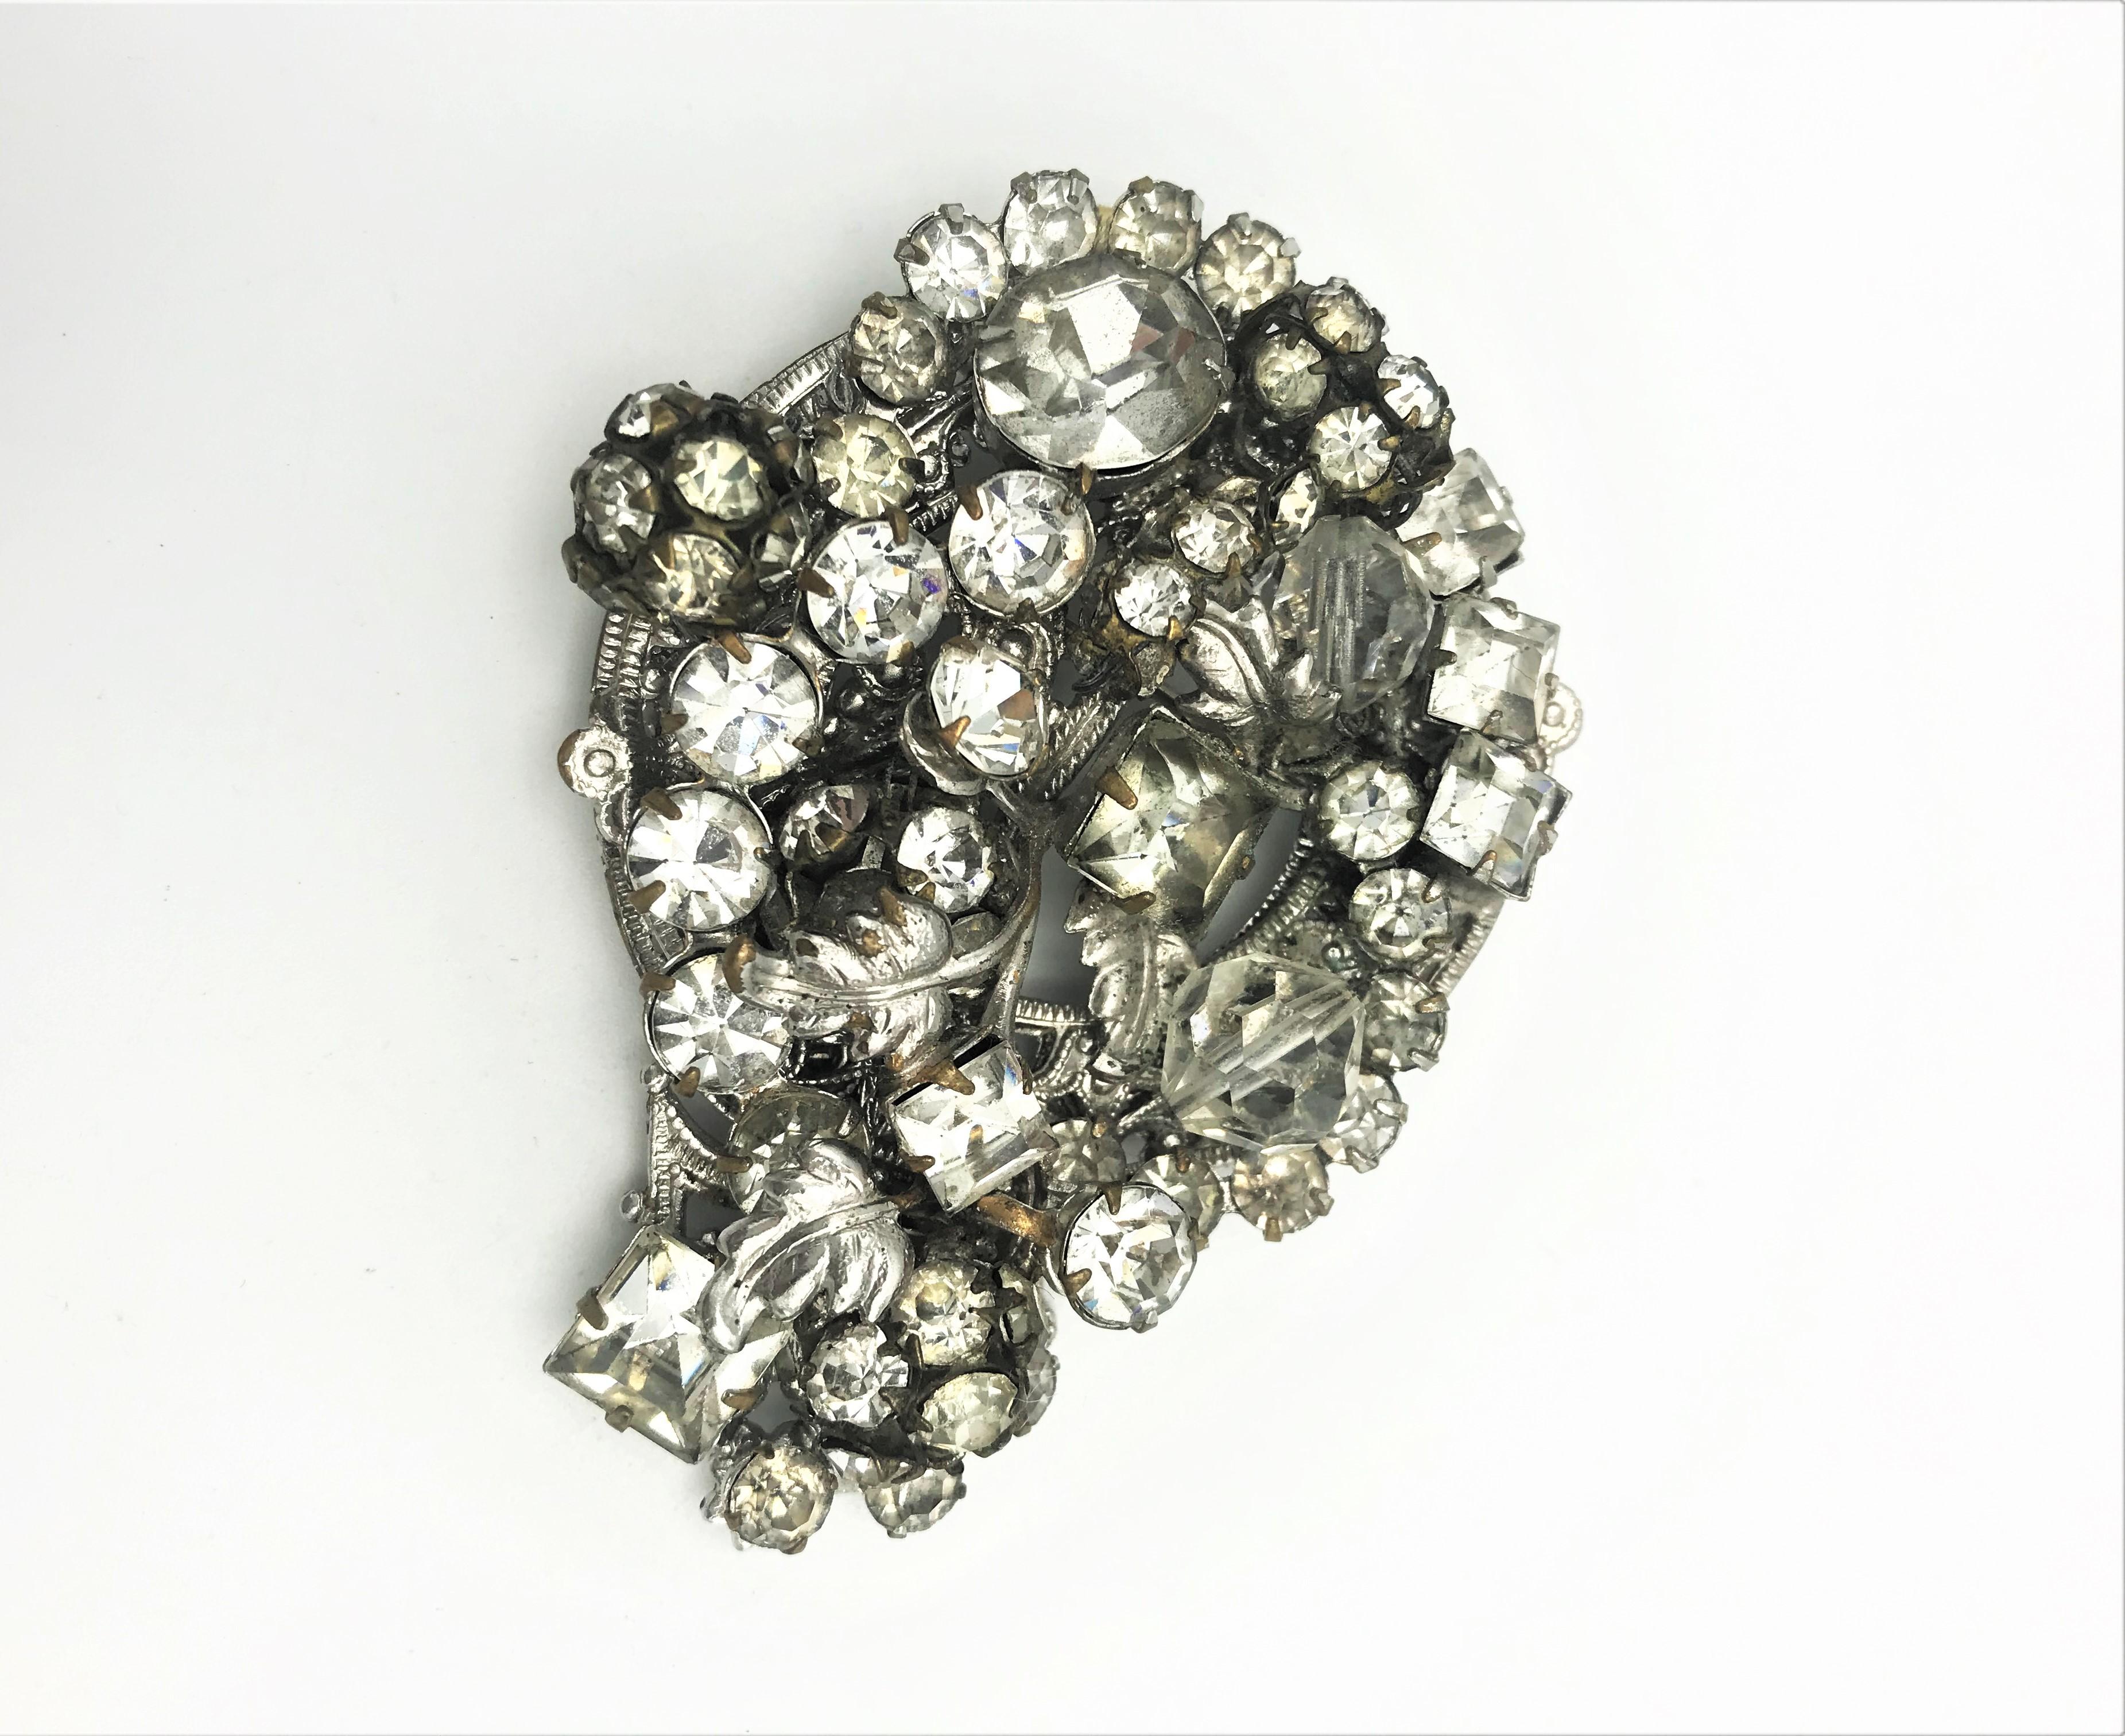 A very decorative and plastic brooch by Robert USA filled with many different sized and cut rhinestones, in between there are small silver-colored leaves.
Measurement: Height 7.5 cm, Width 4.5 cm.